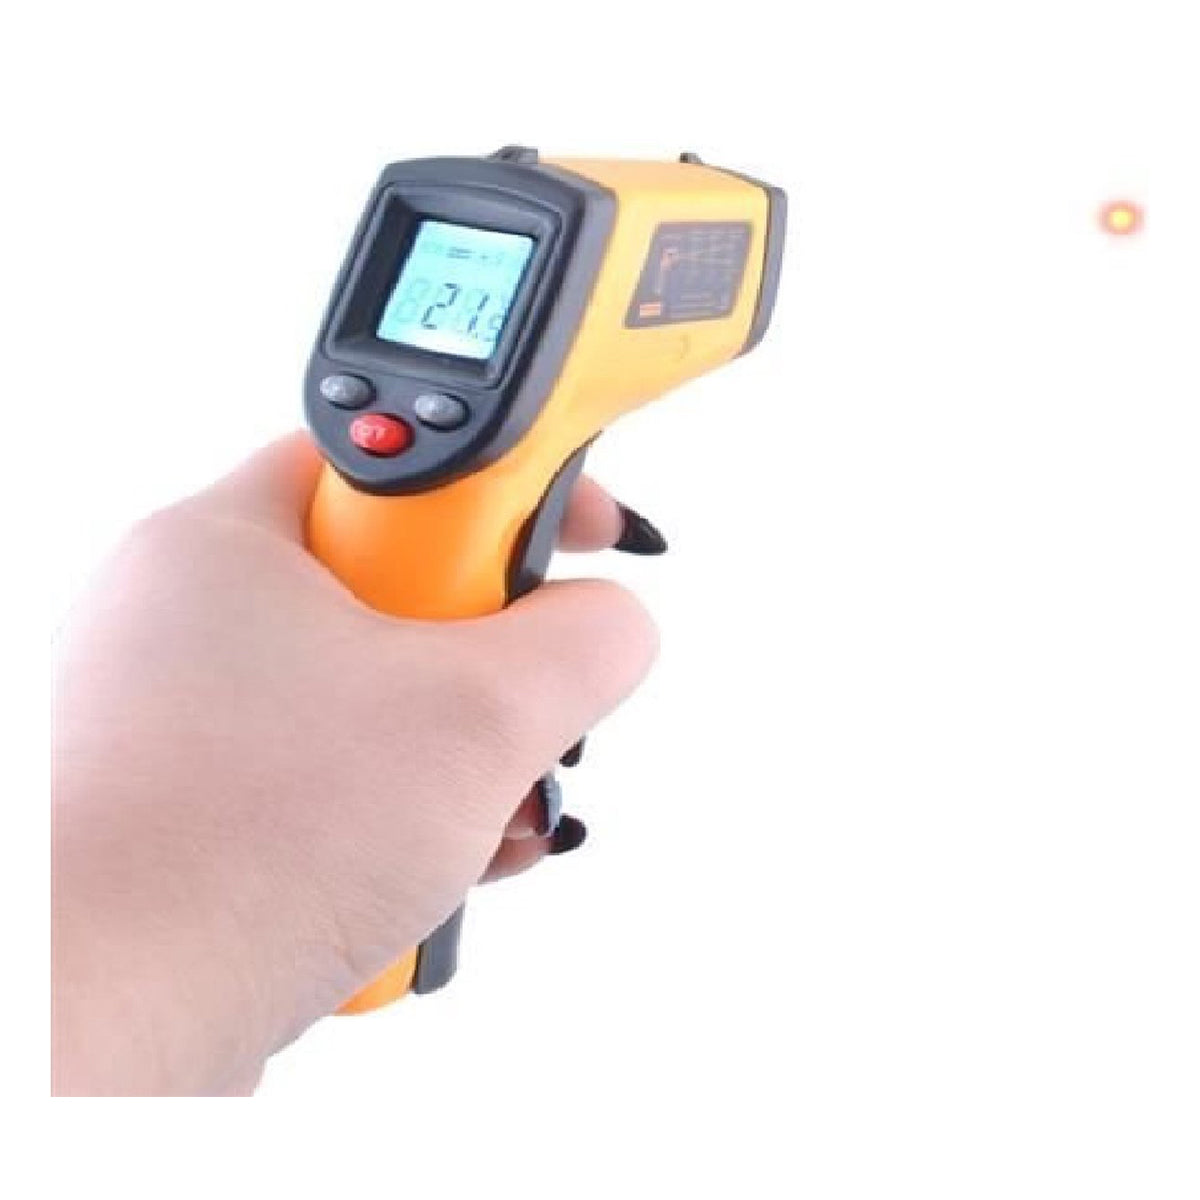 <tc>Ariko</tc>  Infrared Laser Thermometer - Surface thermometer - Non-contact - Laser pointer - Blacklight LCD Screen - Incl Batteries - Orange - up to 380º